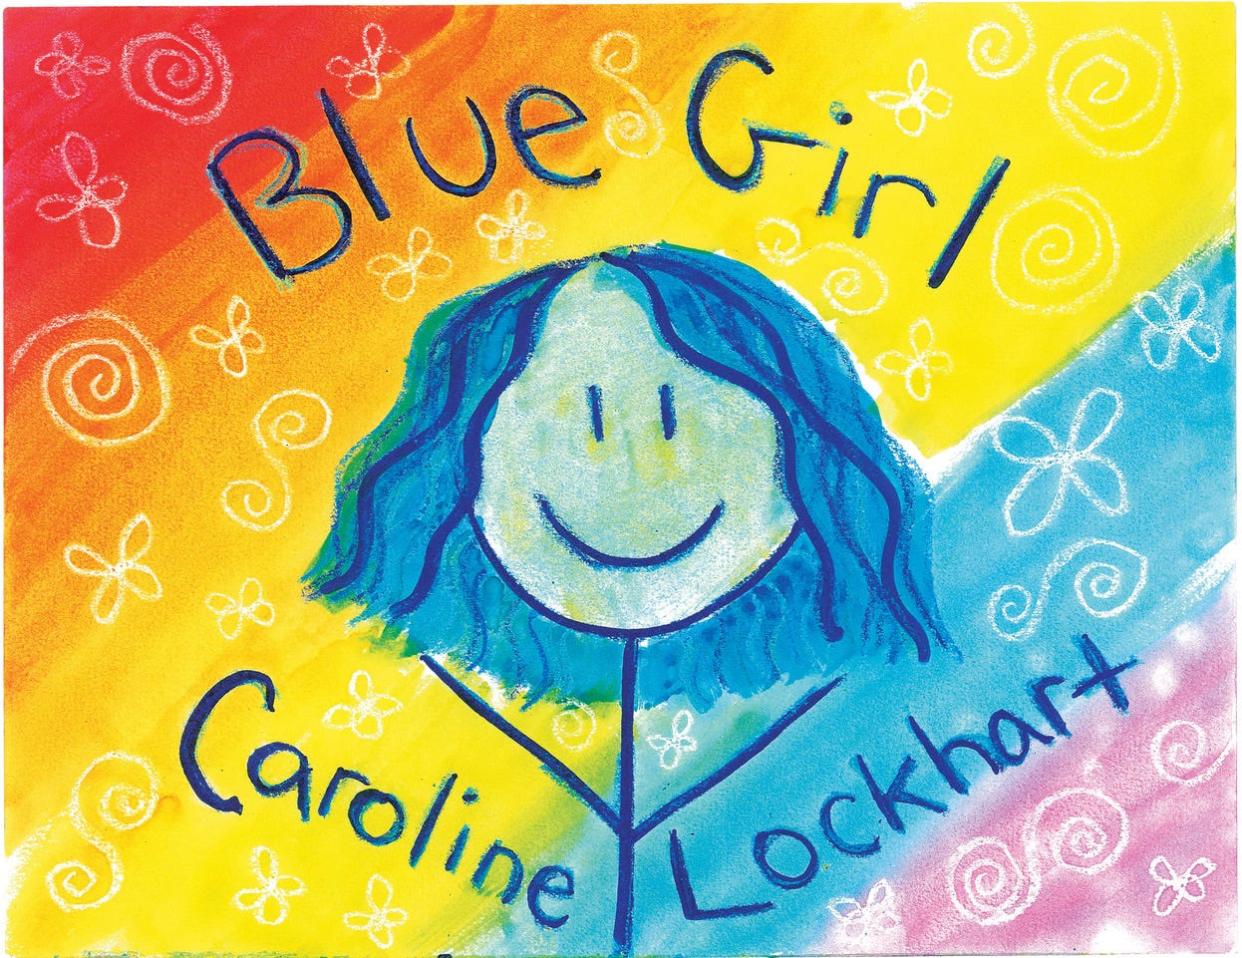 "Blue Girl" was released Aug. 1, 2022, and is available in  hardcover and paperback.